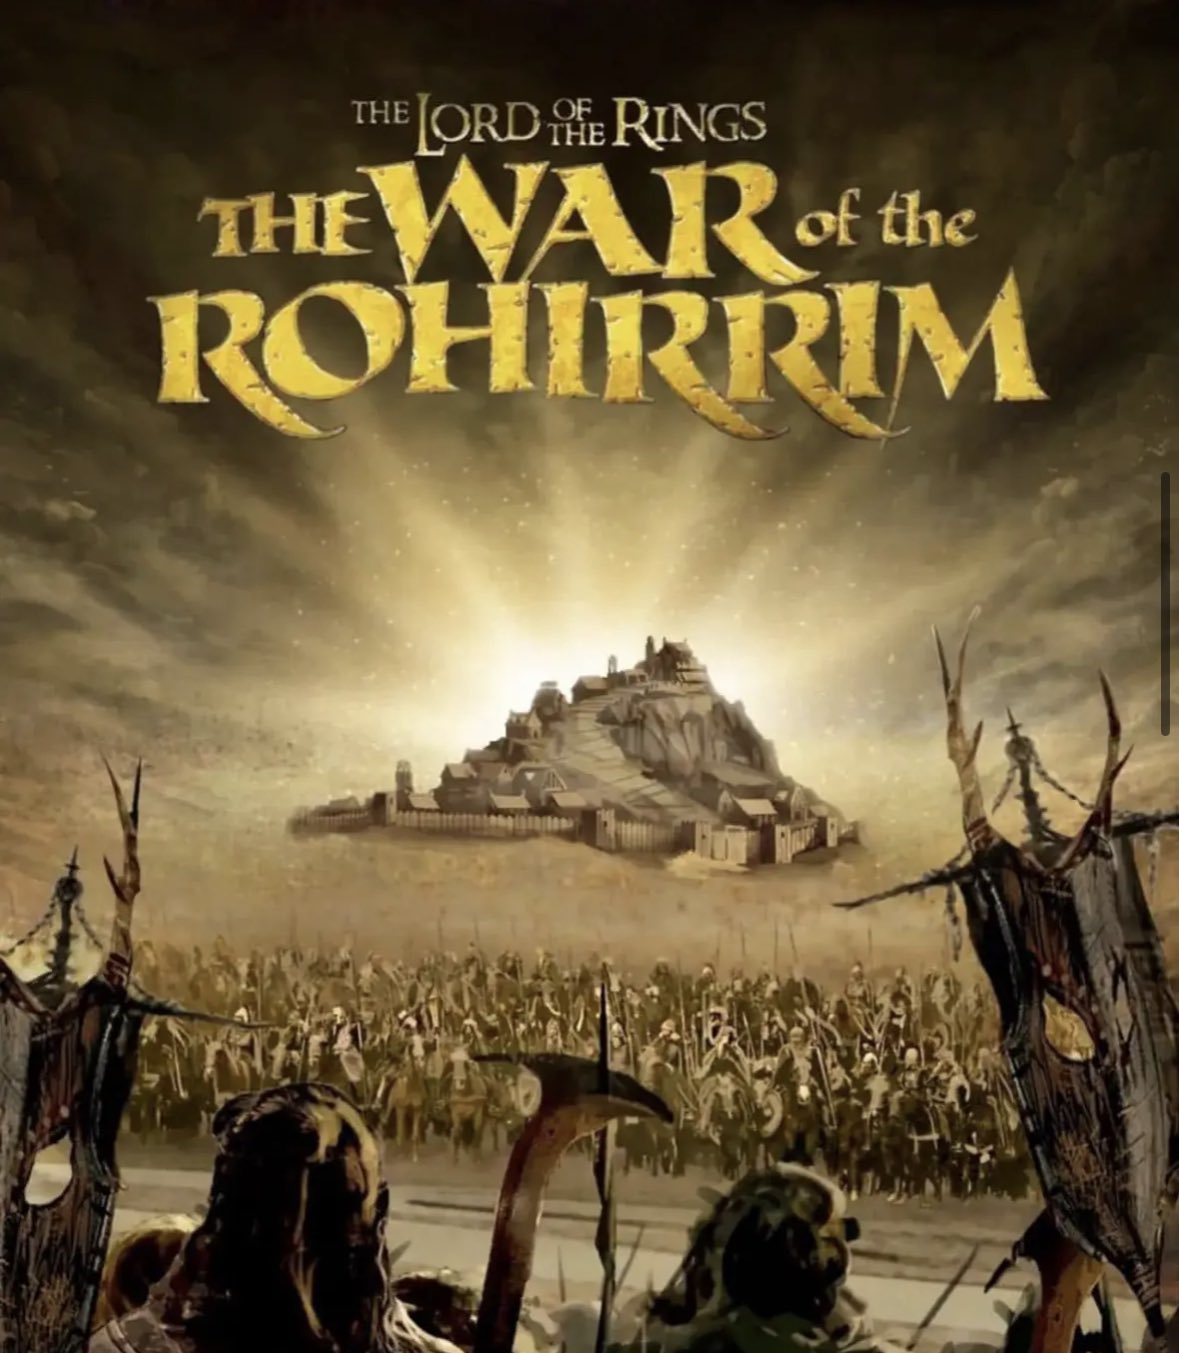 TCG - The Lord of the Rings: The War of the Rohirrim Film